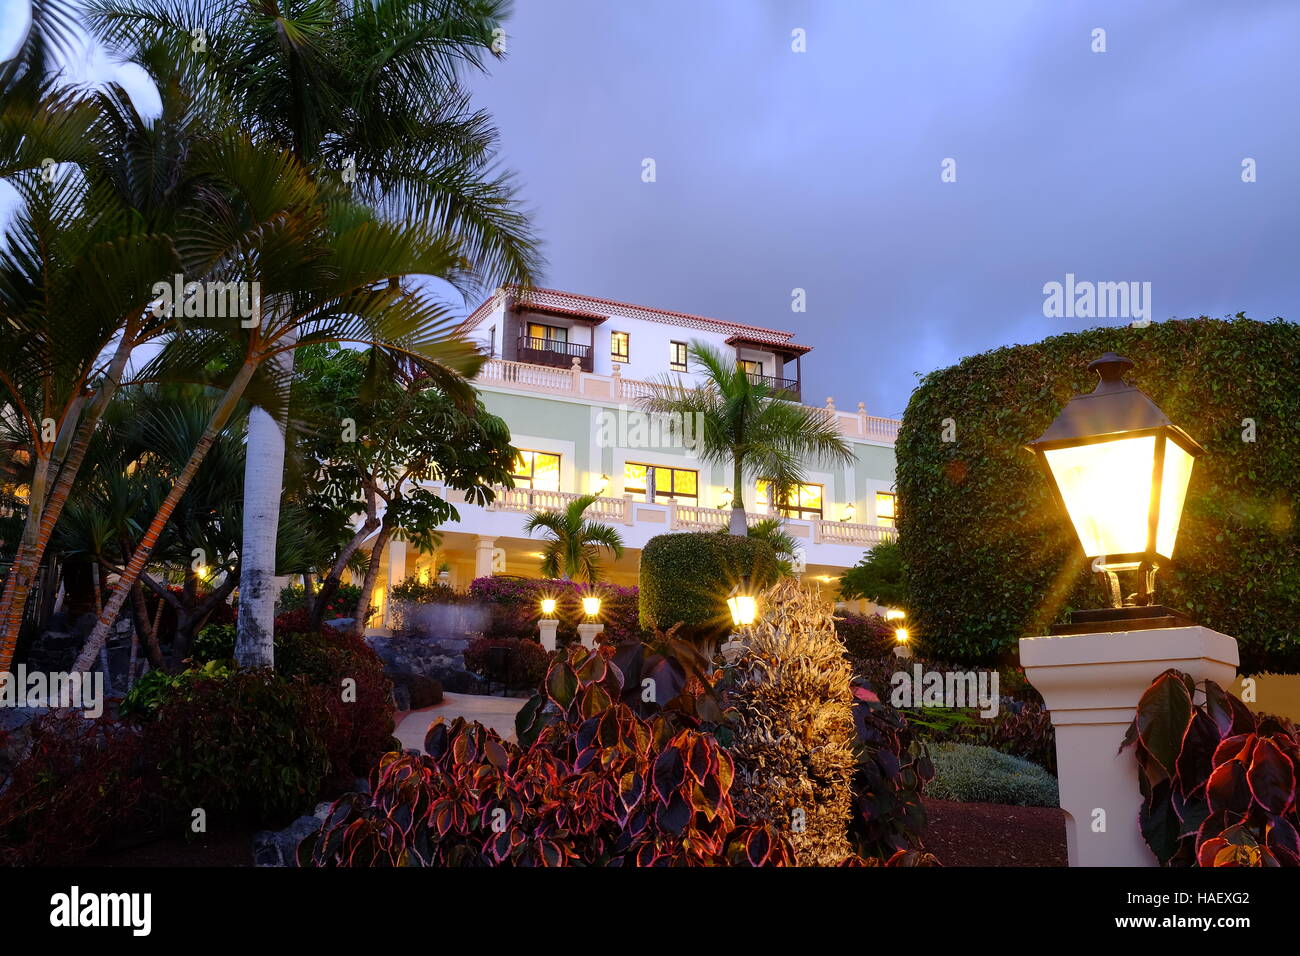 A tropical hotel resort at night Stock Photo